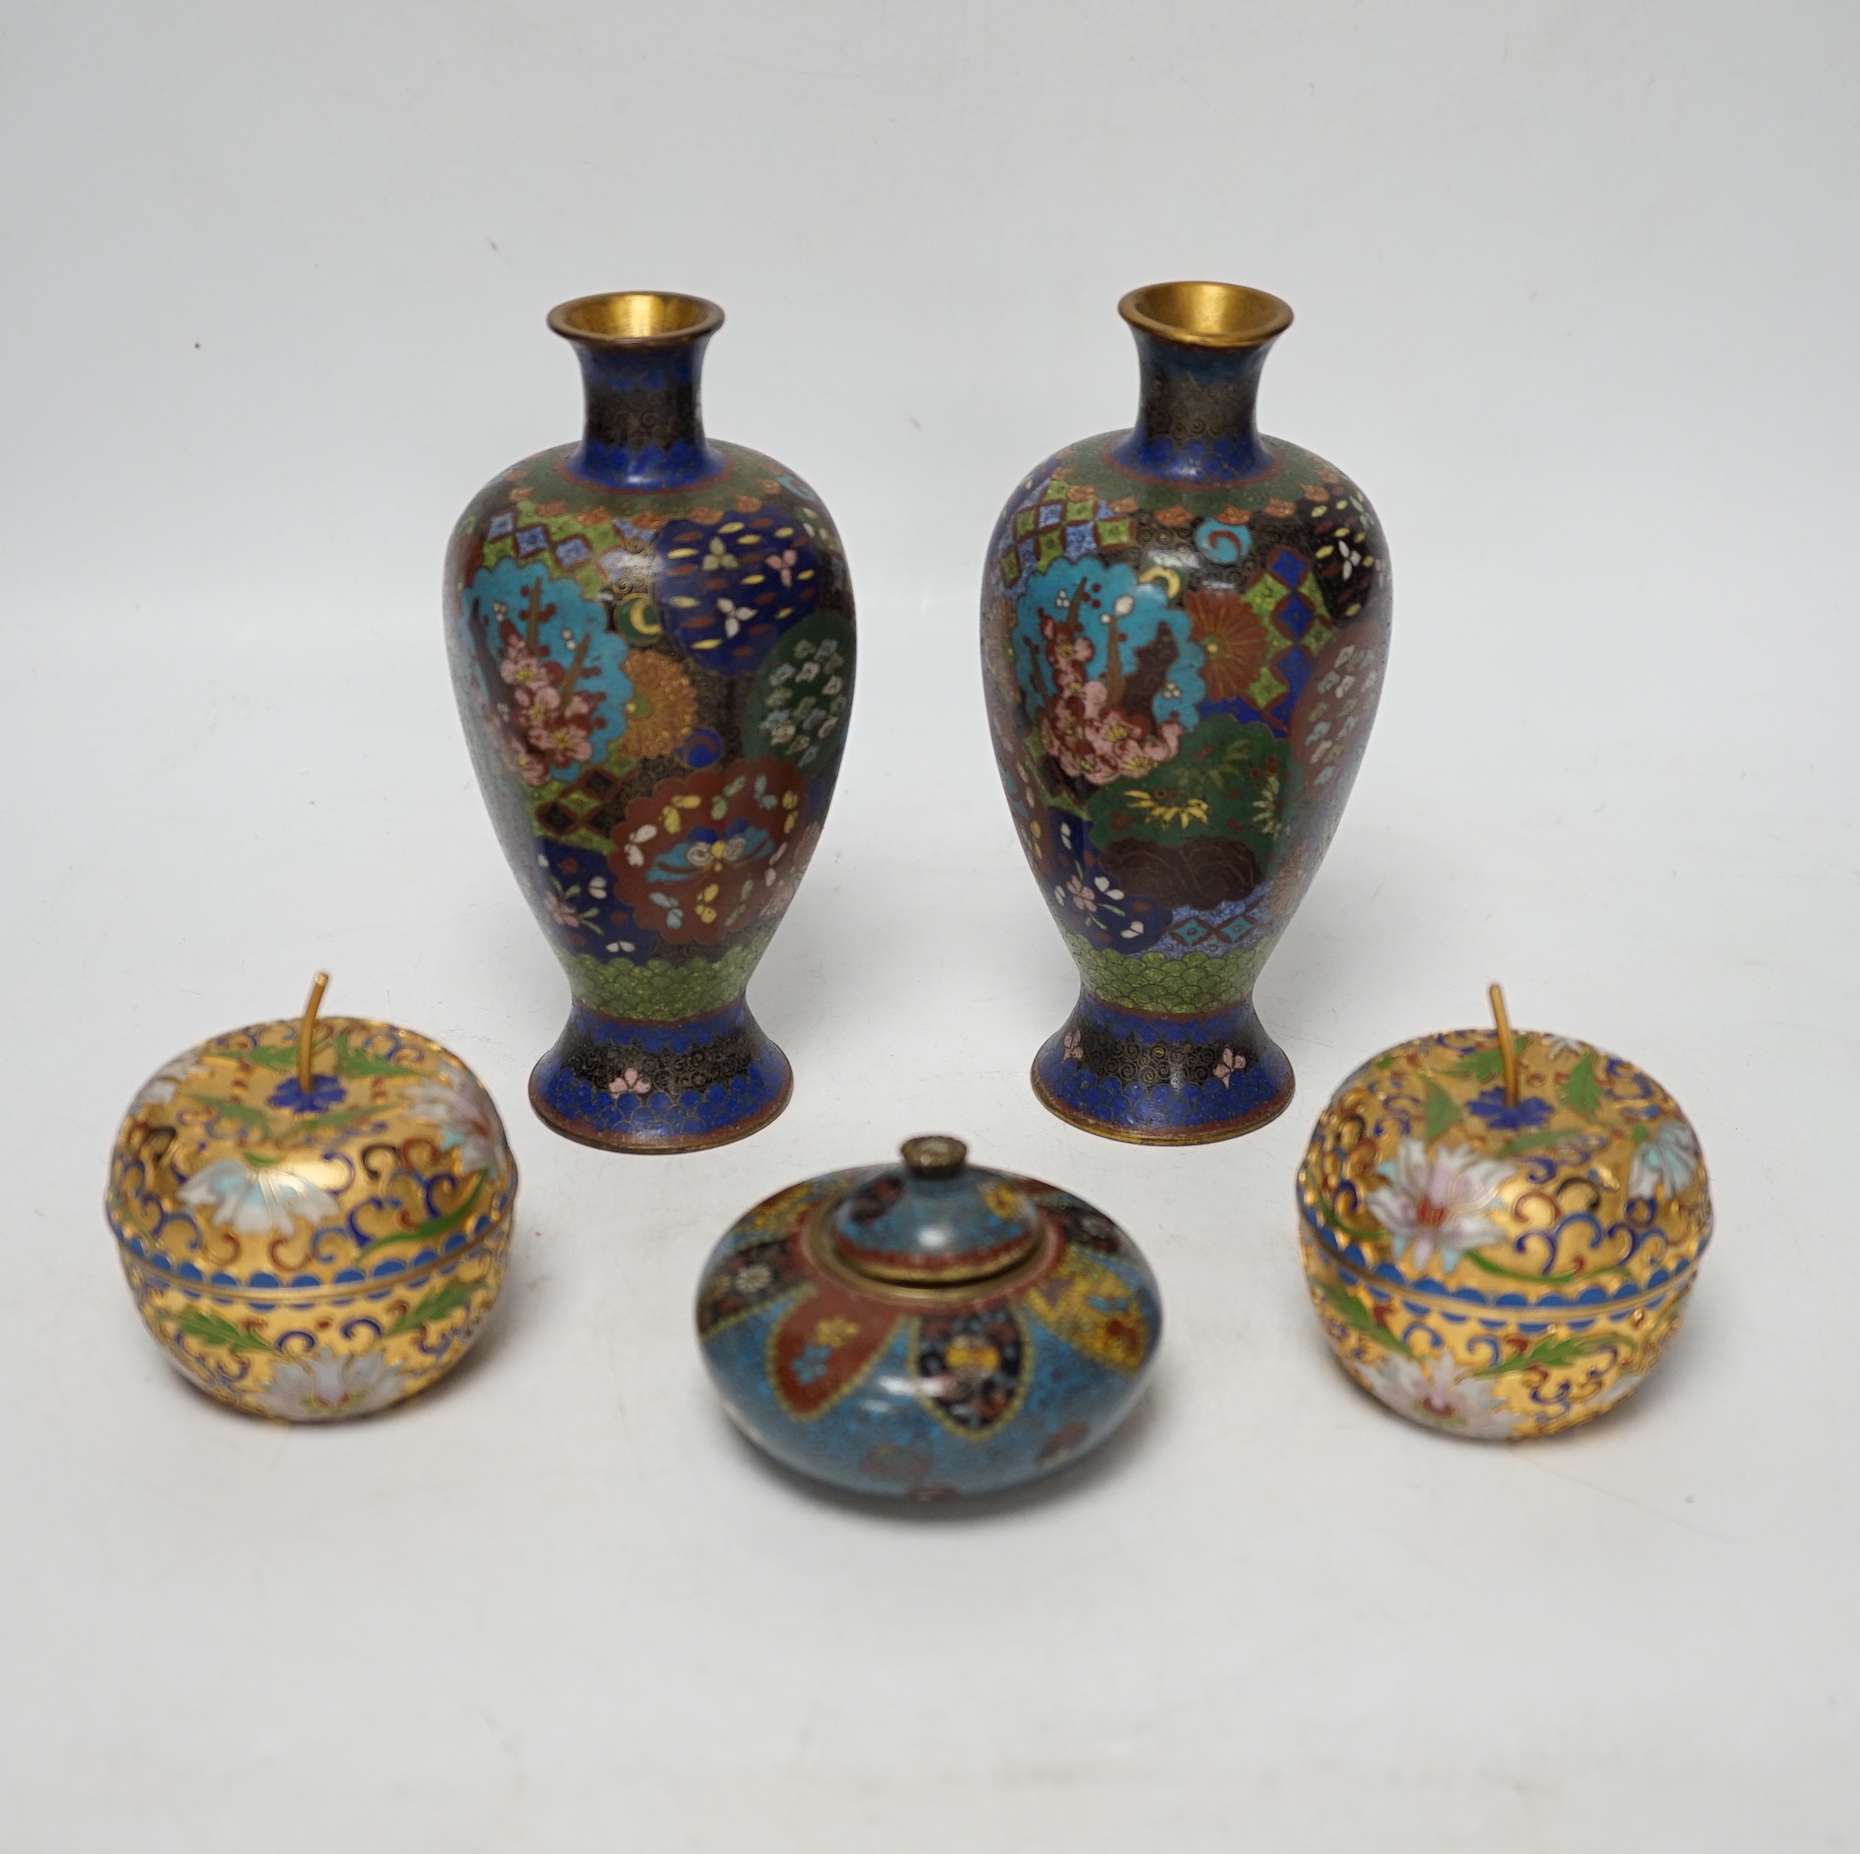 A pair of Chinese cloisonné enamel vases, similar Meiji period Japanese pot and cover and a pair of champleve ‘Apple’ boxes and covers, tallest 15cm